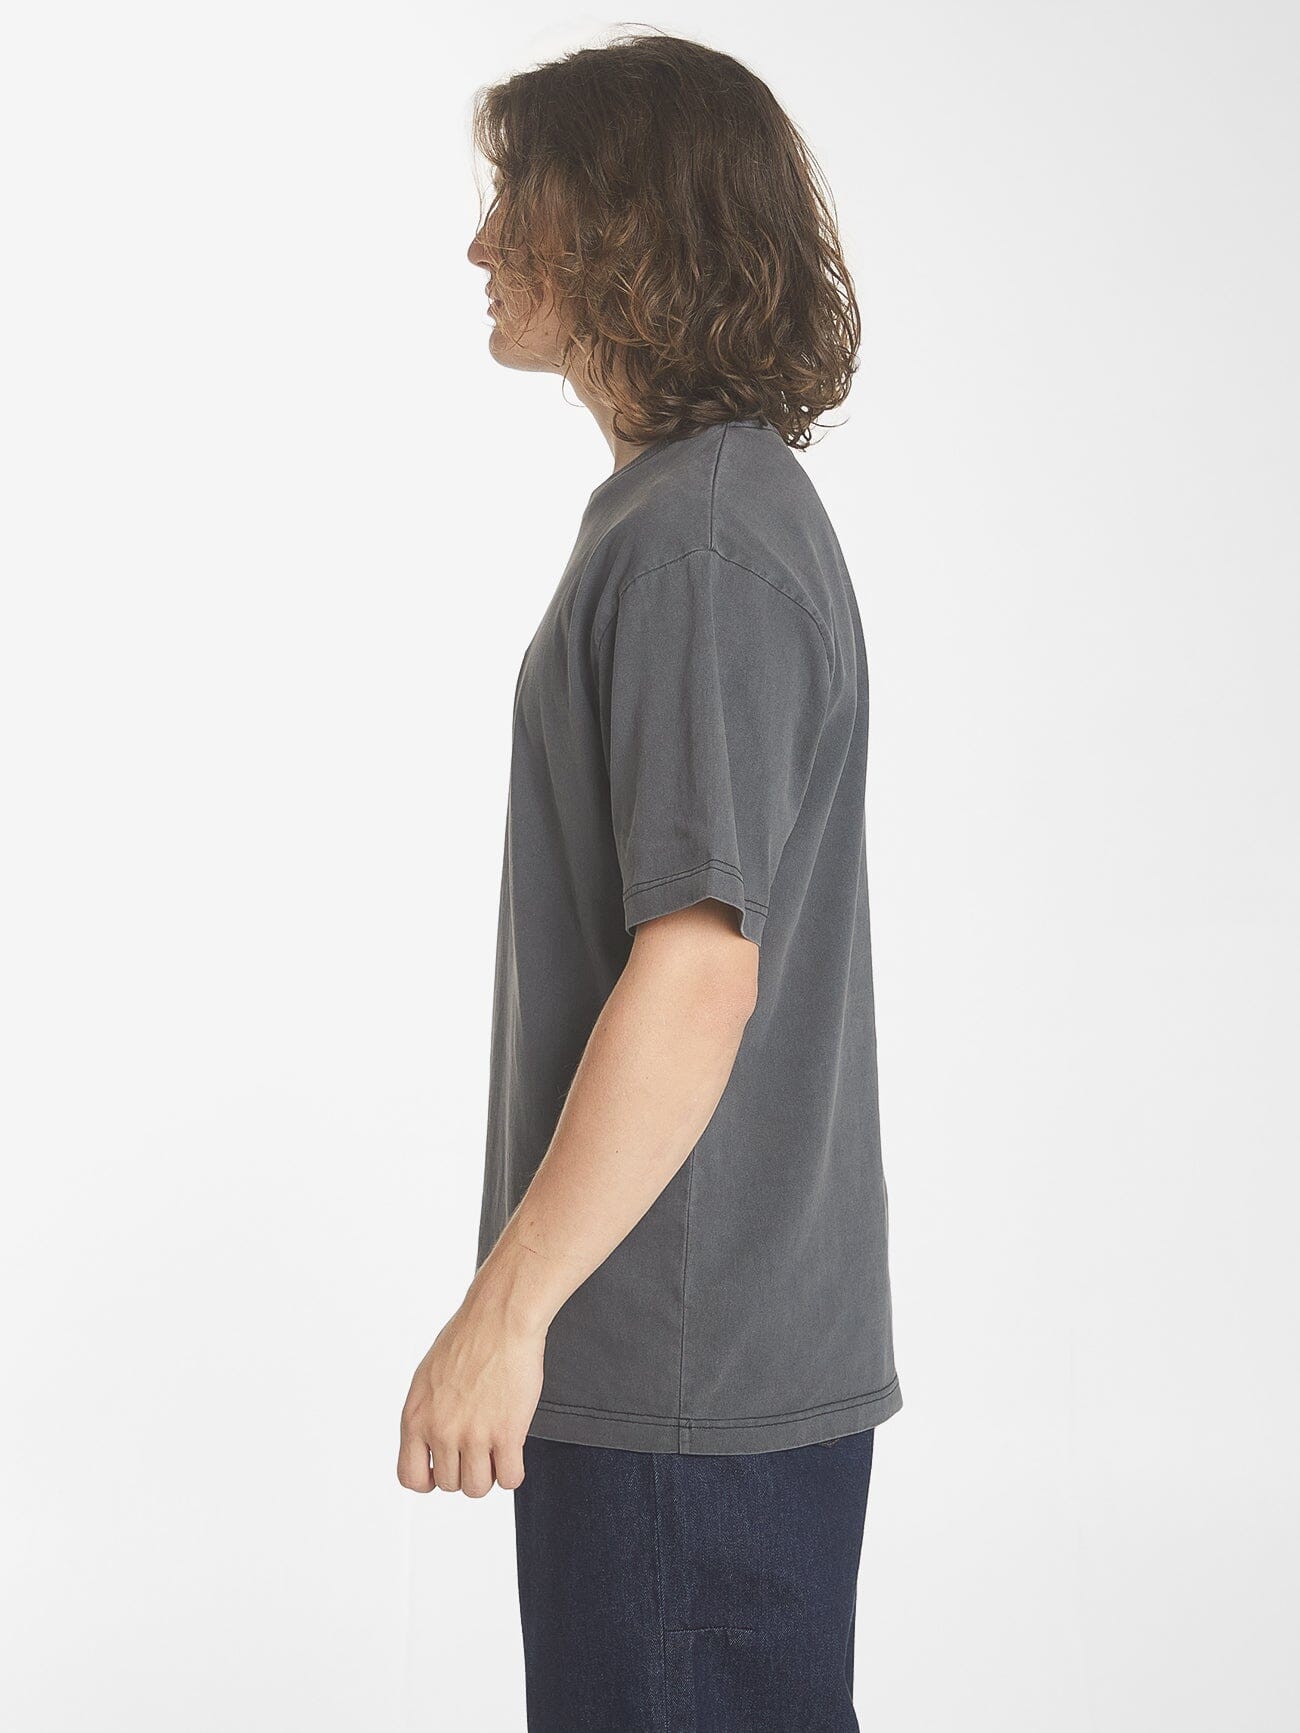 Built For Speed Oversize Fit Tee - Merch Black XS